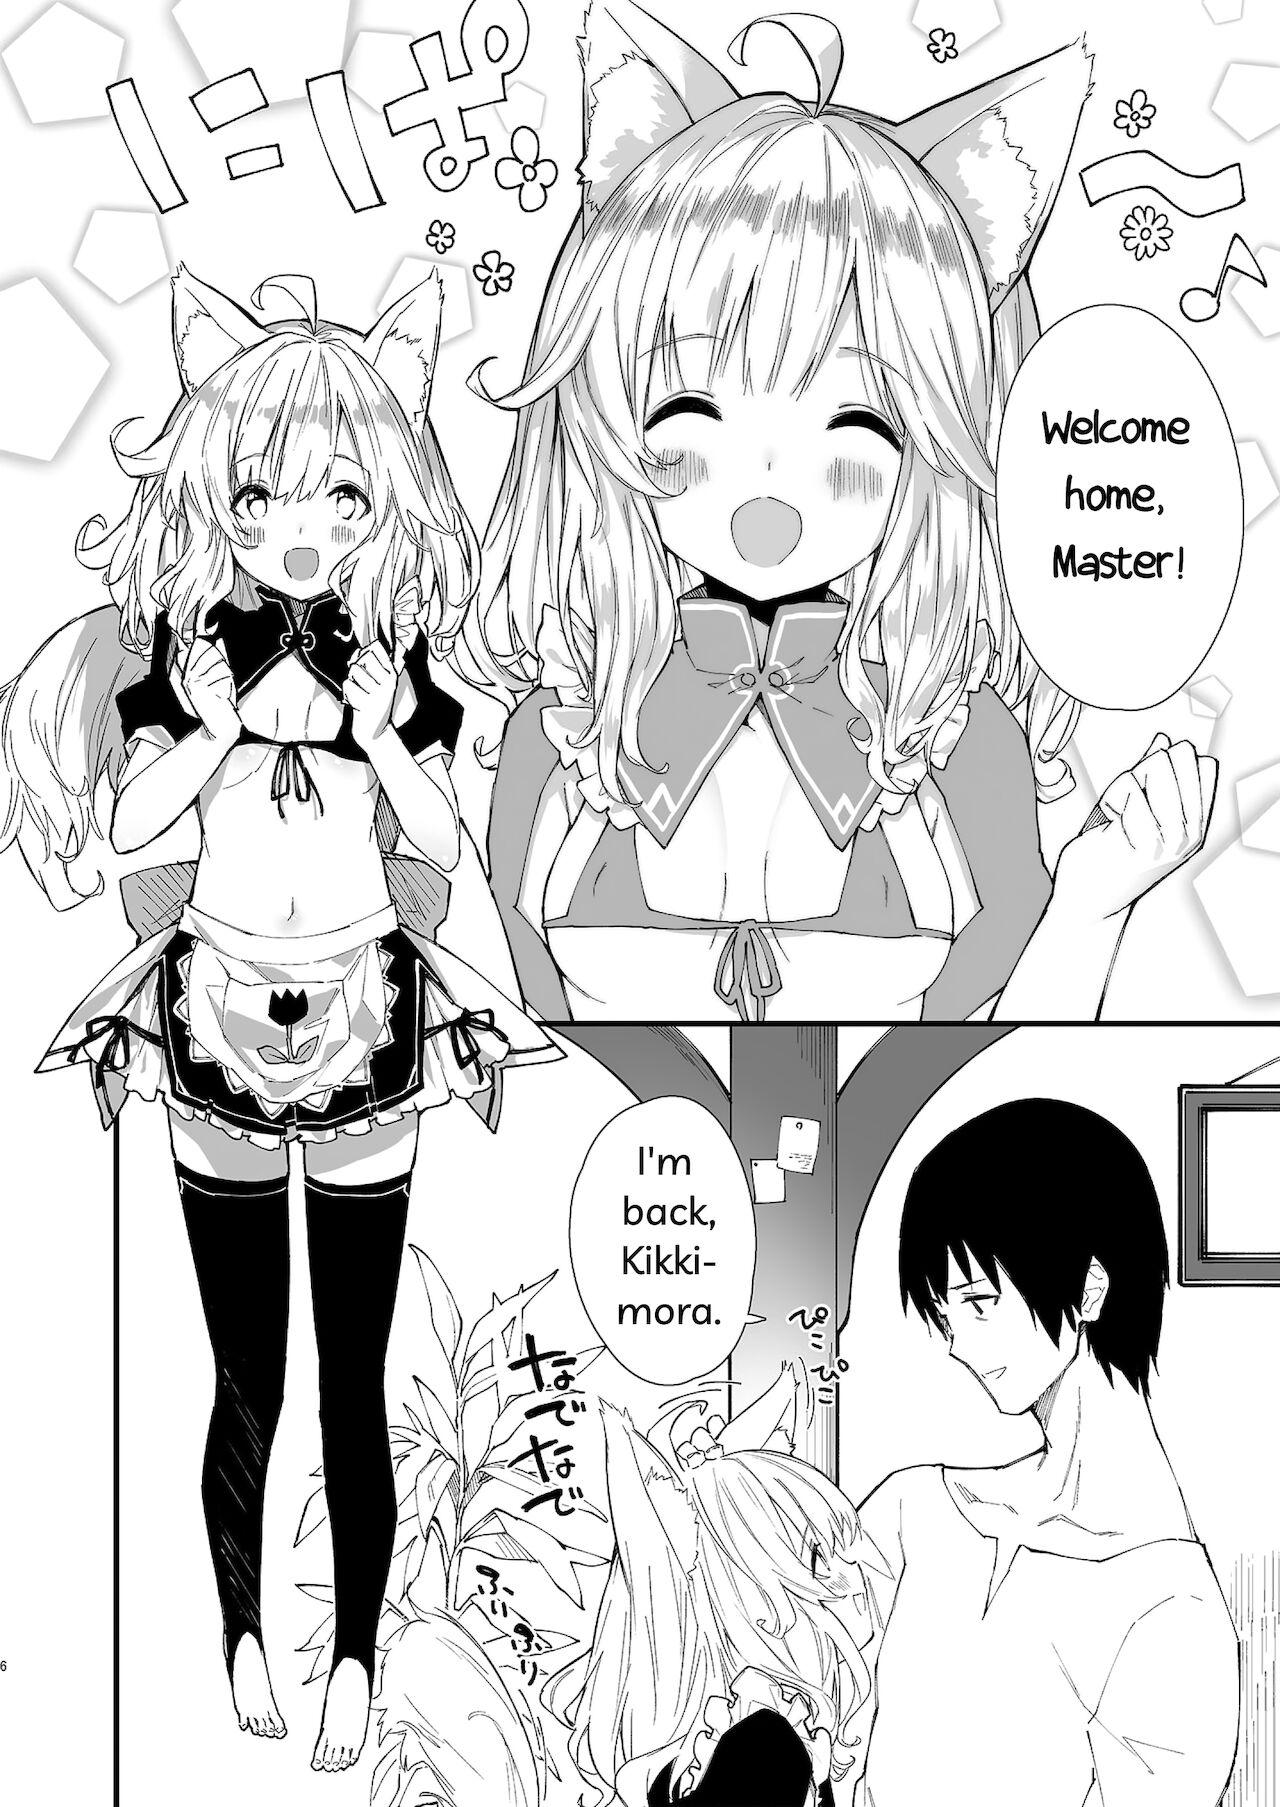 Kemomimi Maid to Ichaicha suru Hon | A Book about making out with a Kemonomimi Maid 3